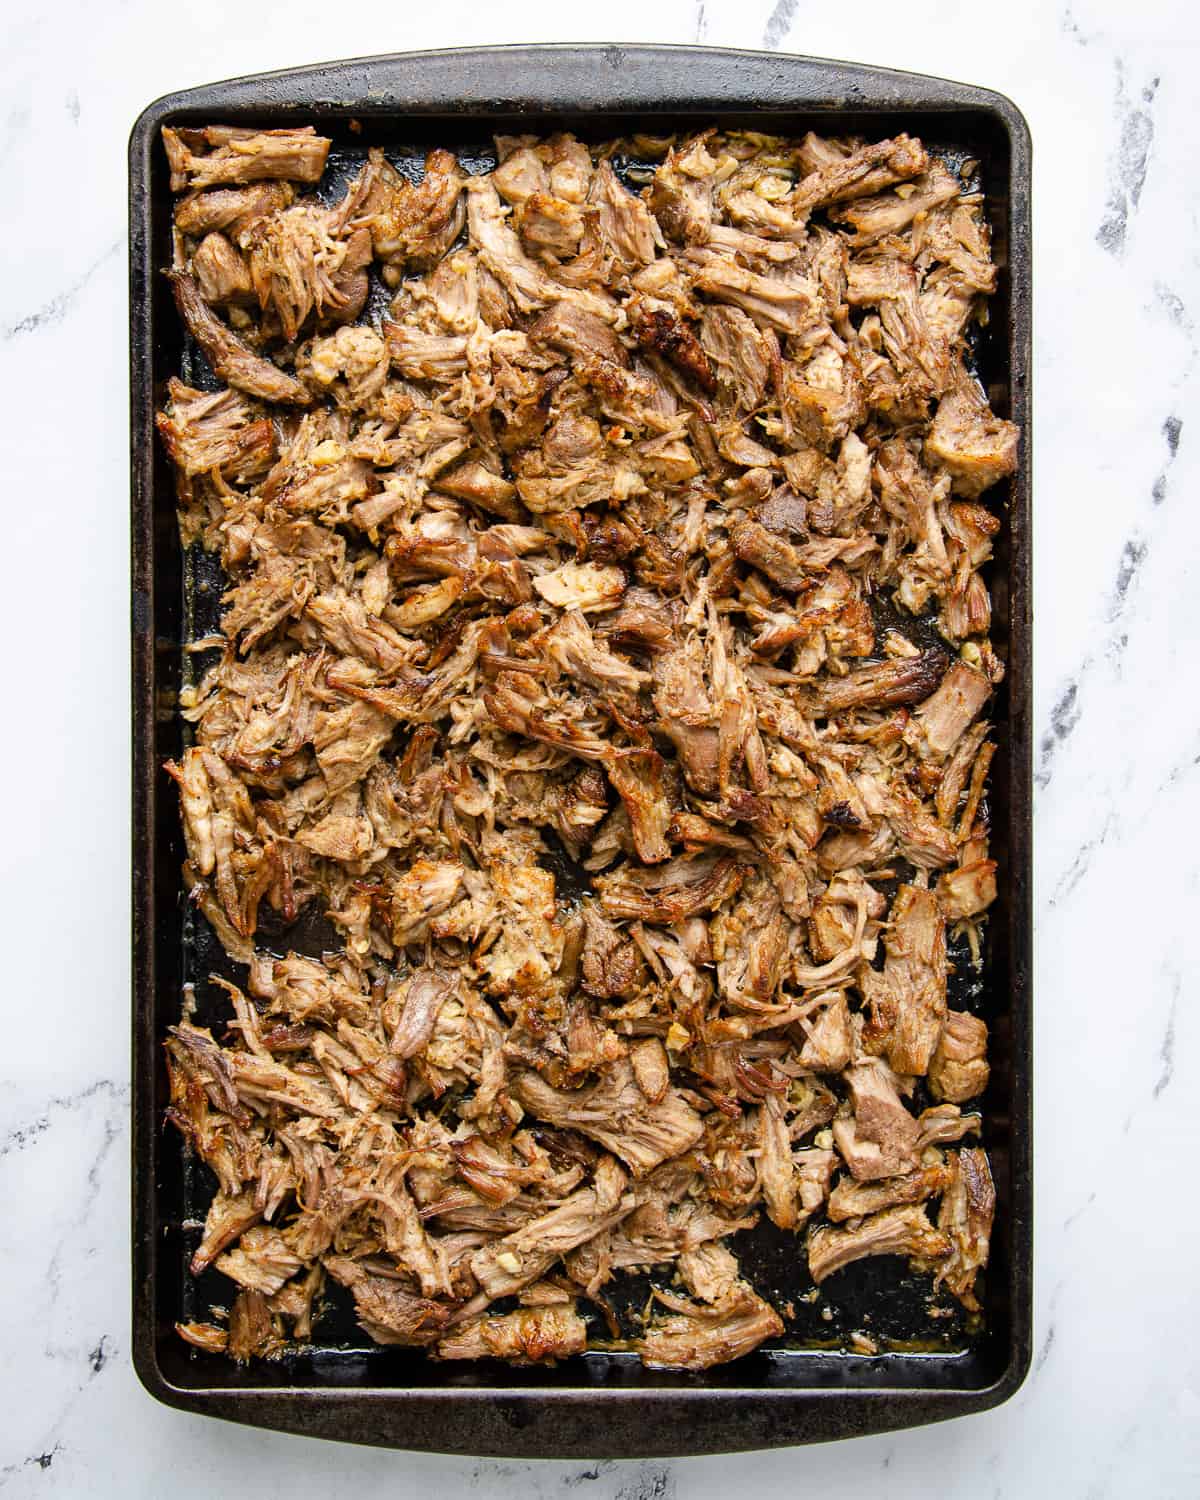 Broiled and browned shredded pork carnitas on a sheet tray.